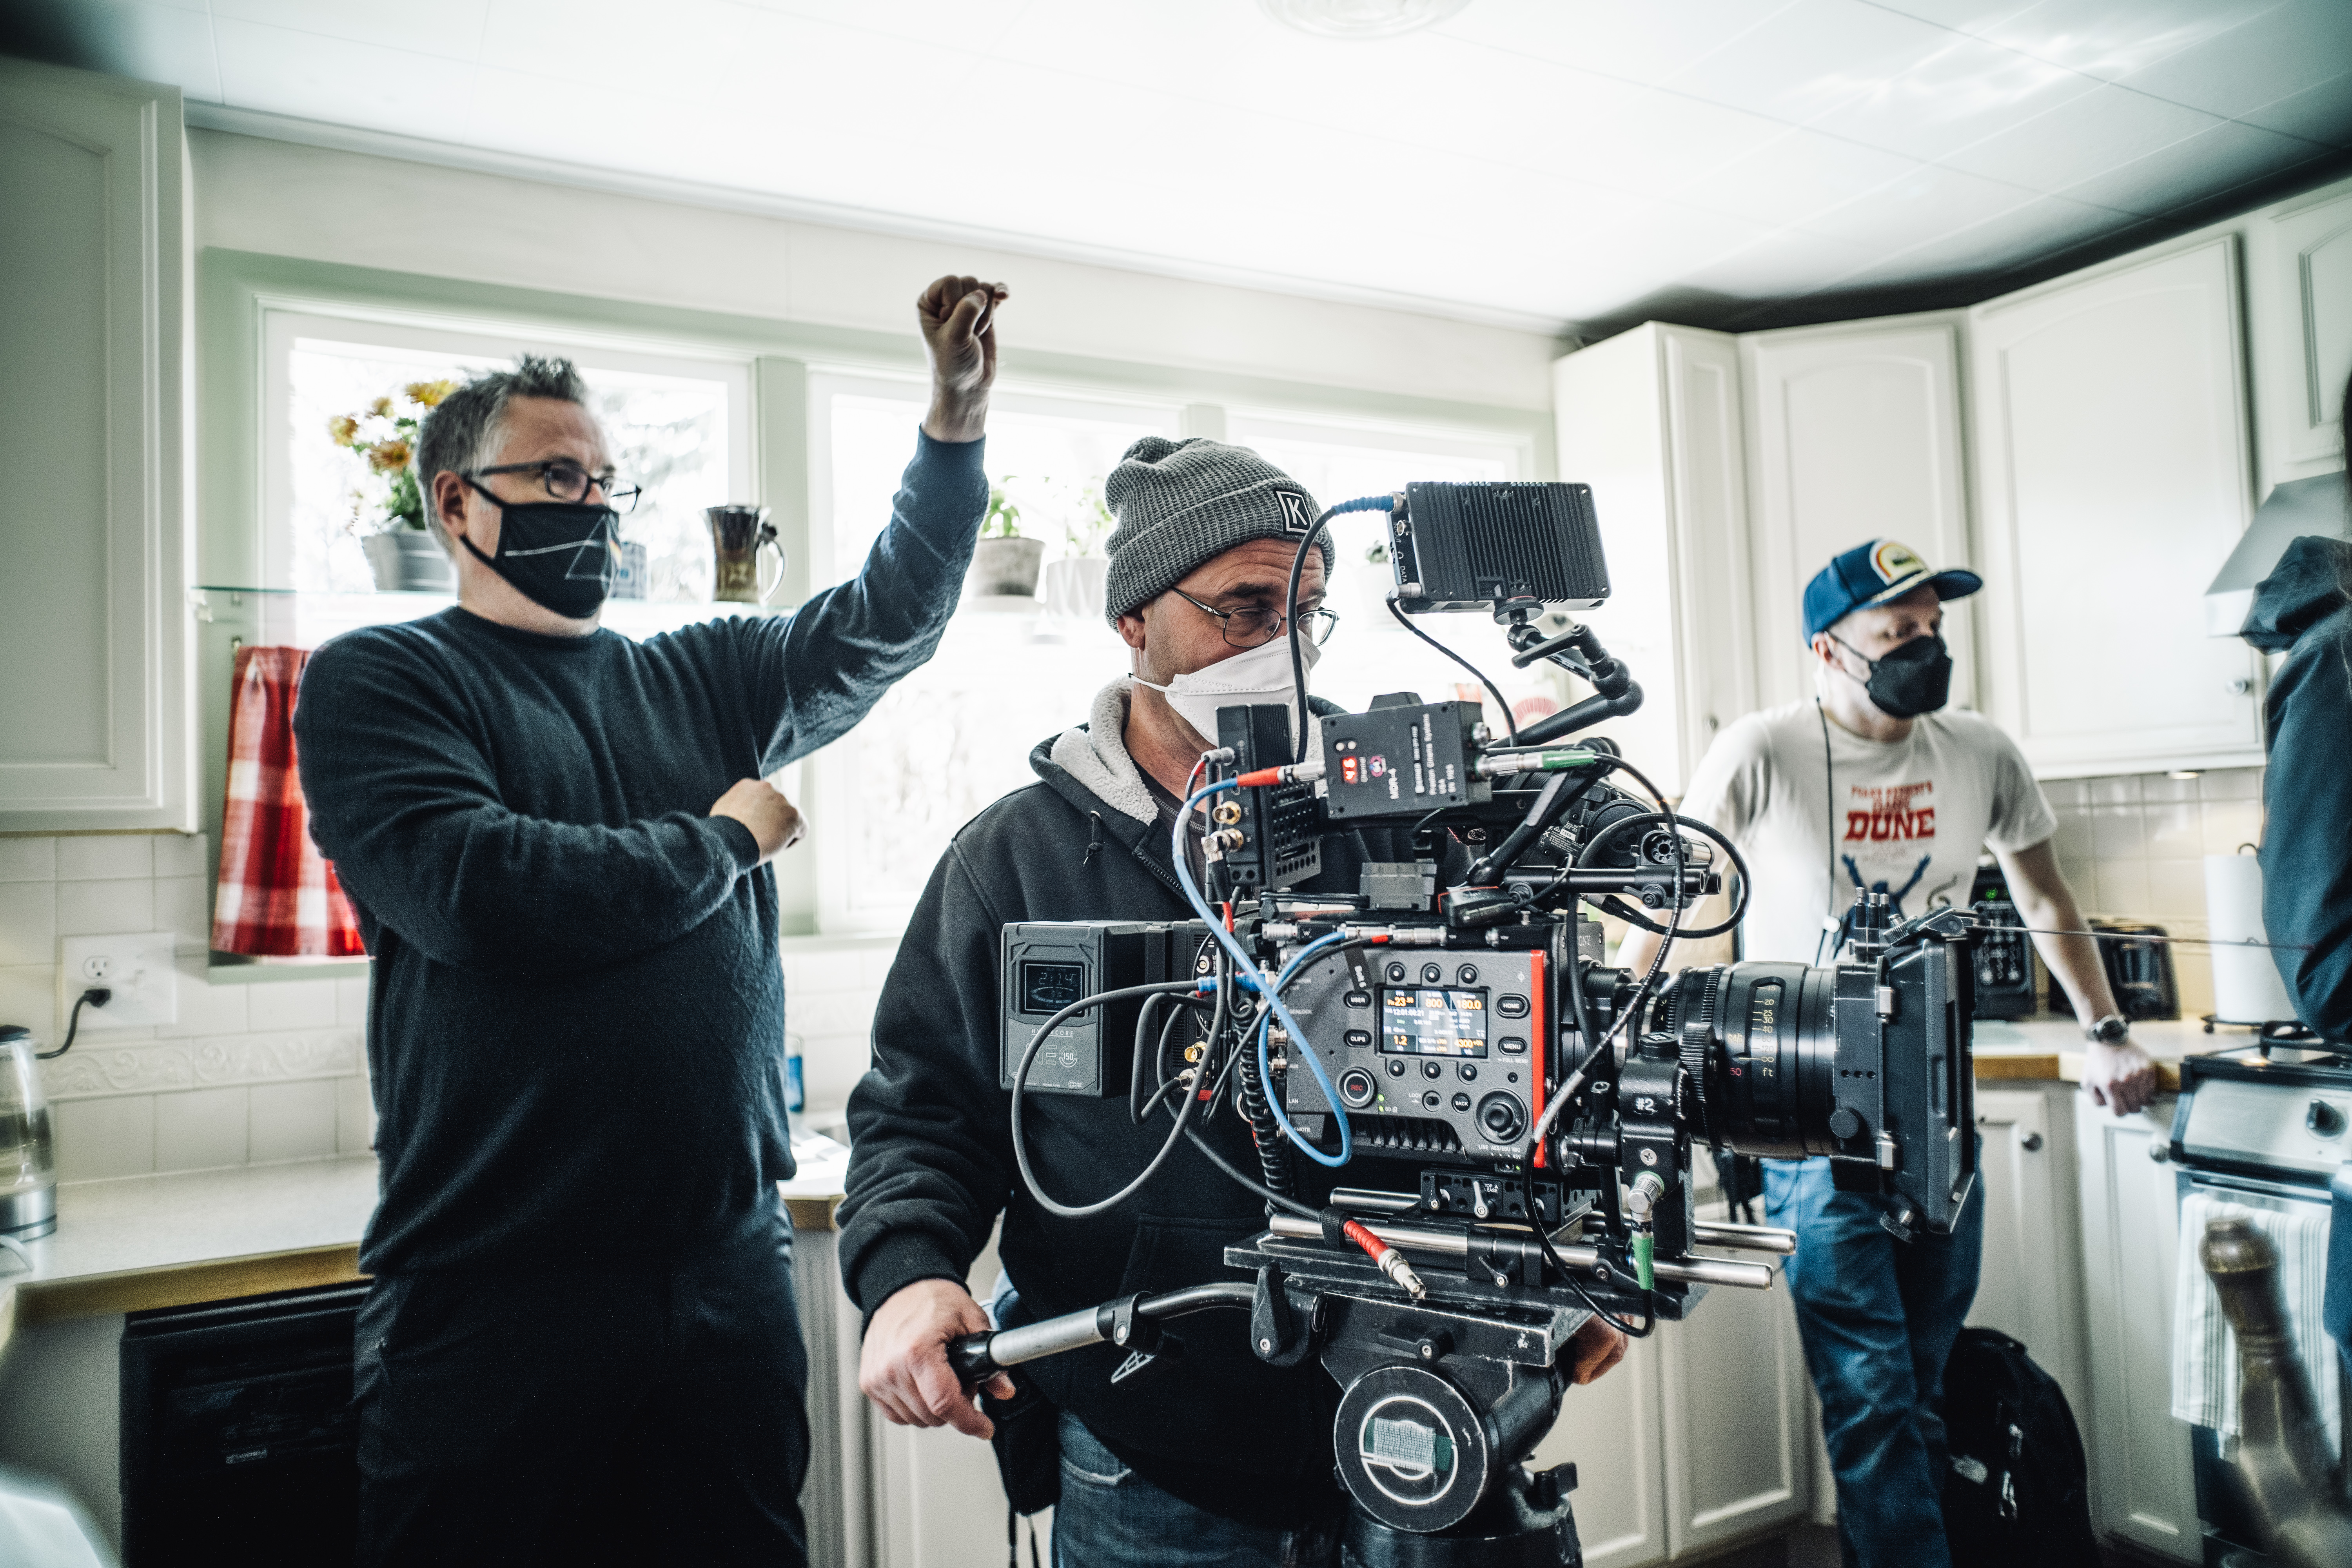 A large camera sits in a kitchen with cast and crew behind. The director is giving a hand signal.